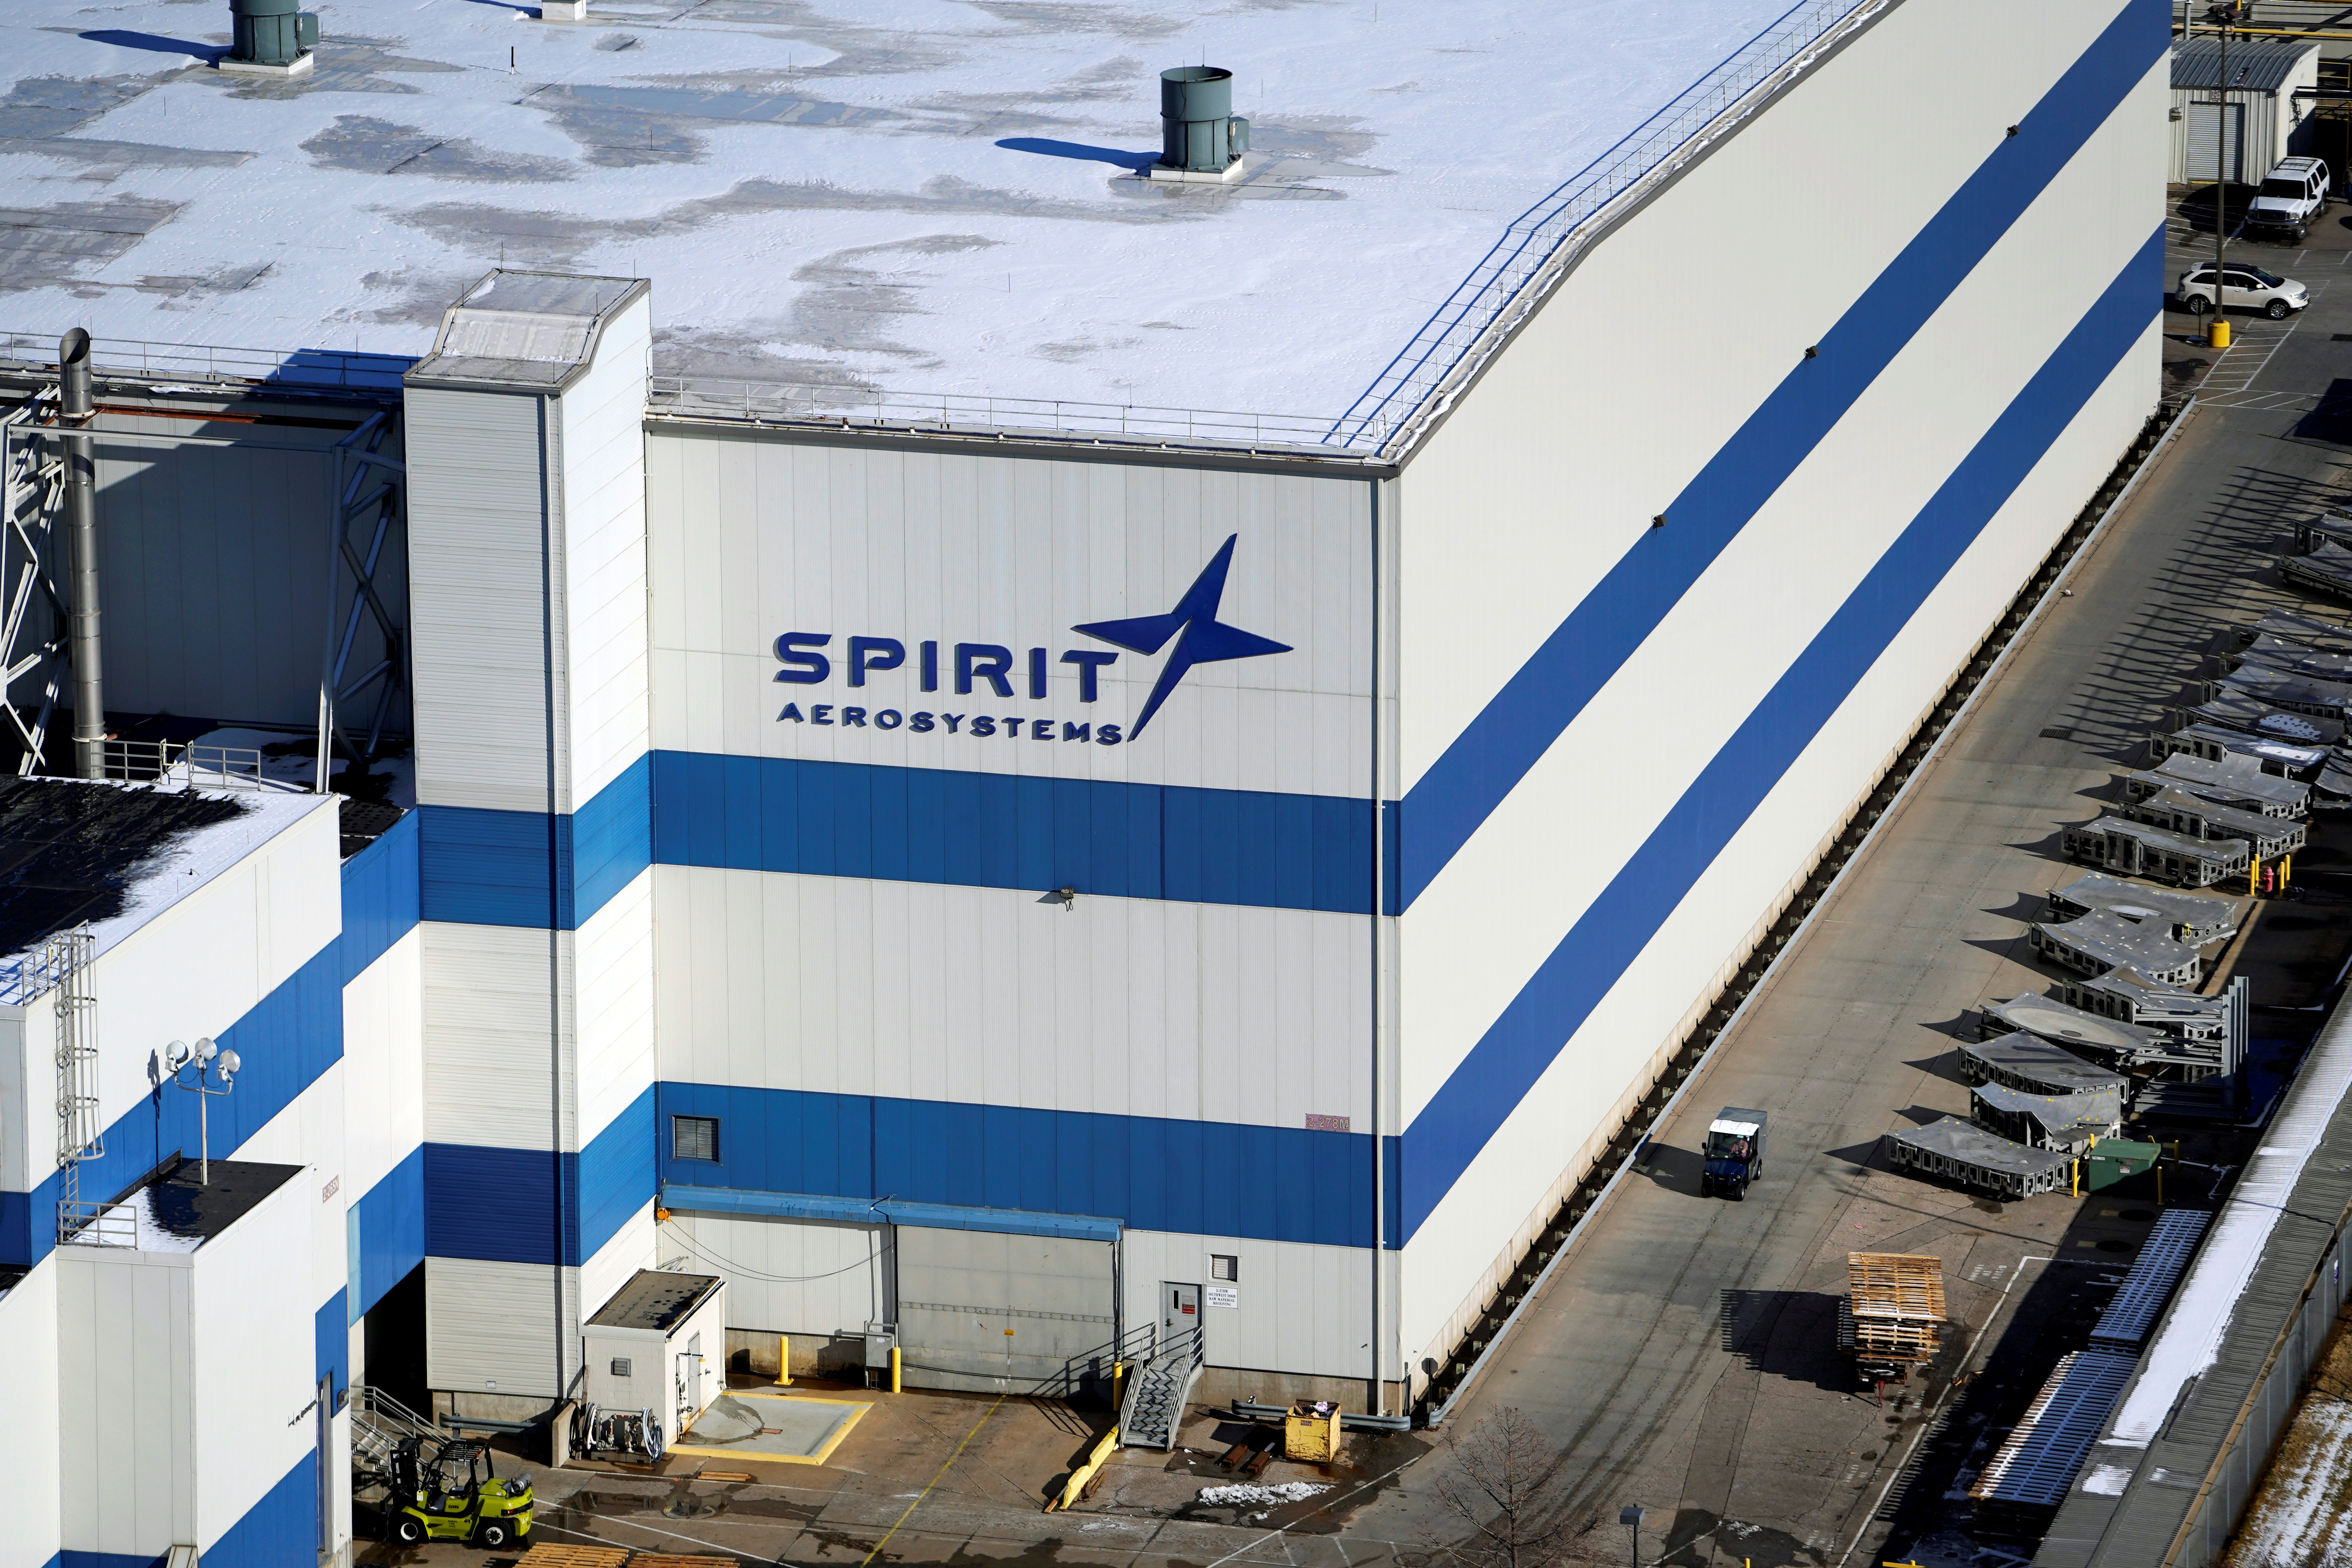 The headquarters of Spirit AeroSystems Holdings Inc, is seen in Wichita